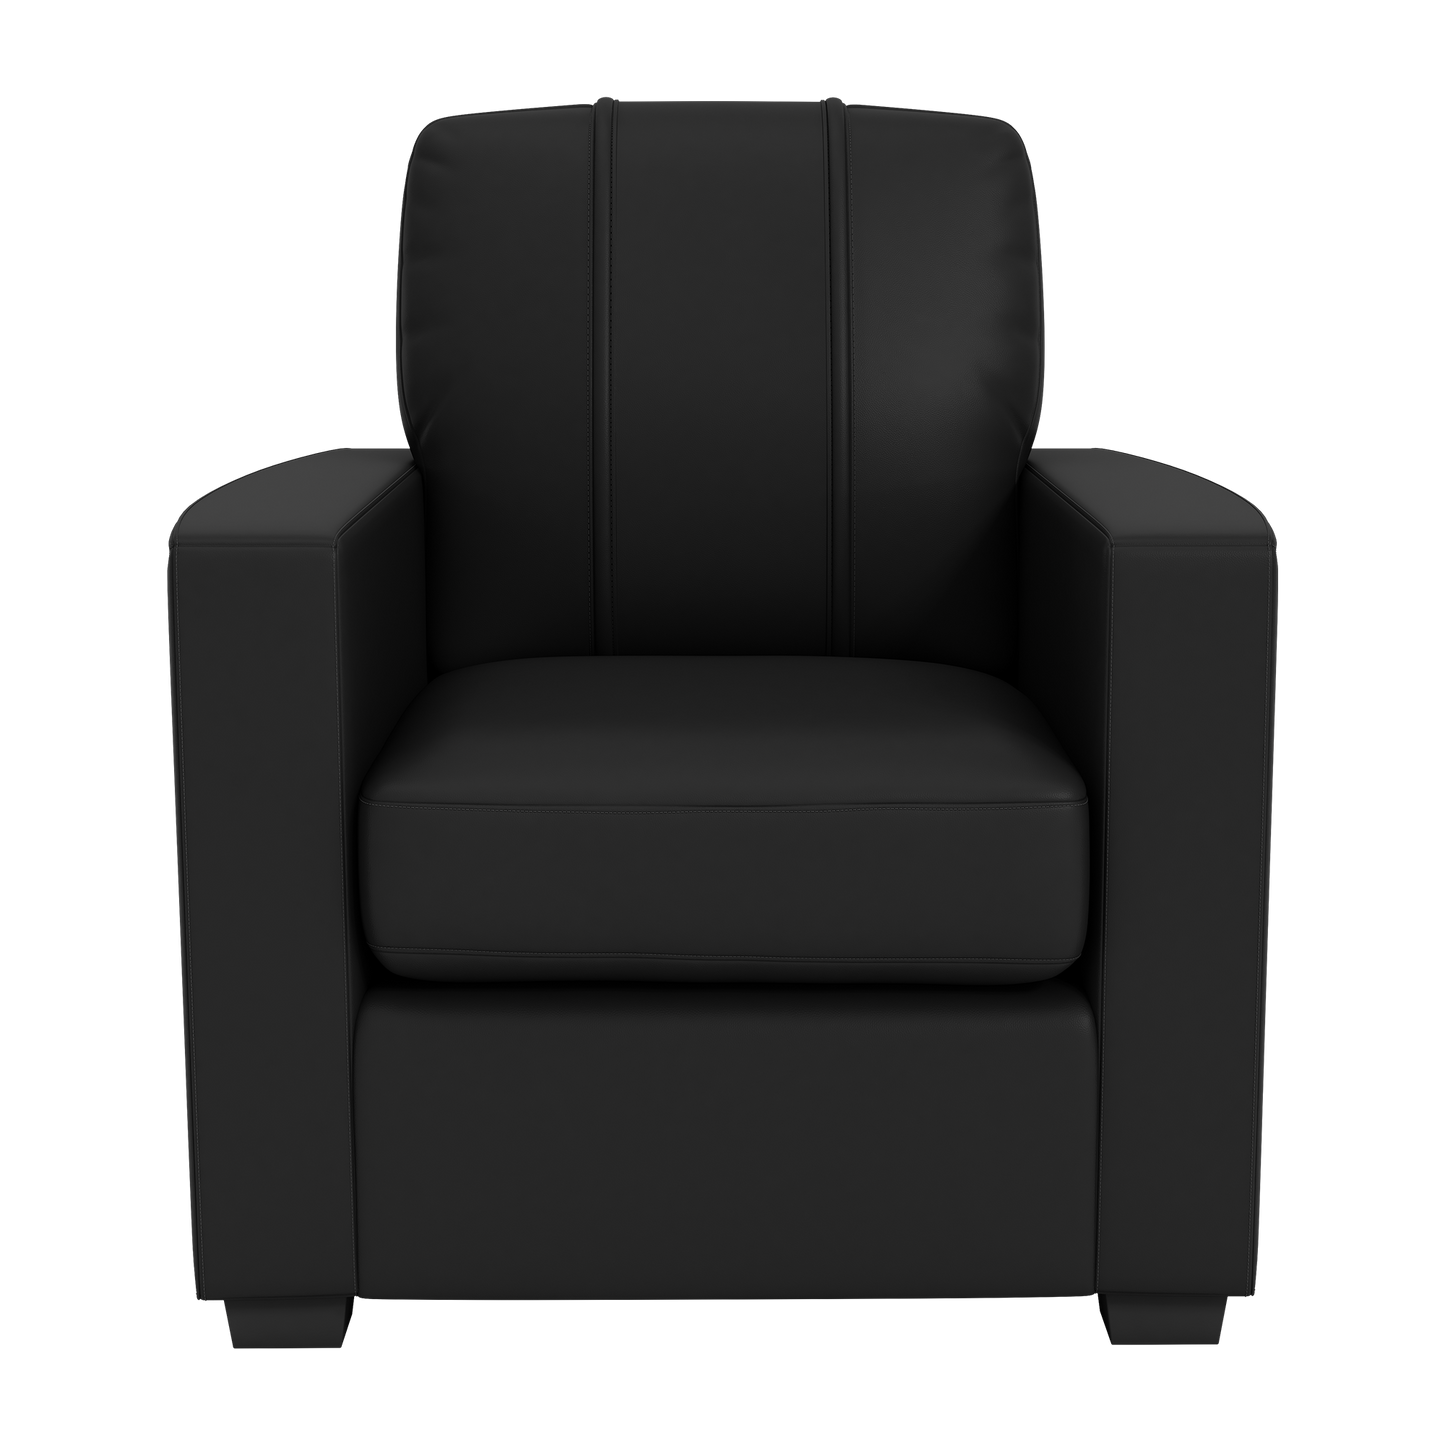 Silver Club Chair with  Cleveland Browns Primary Logo